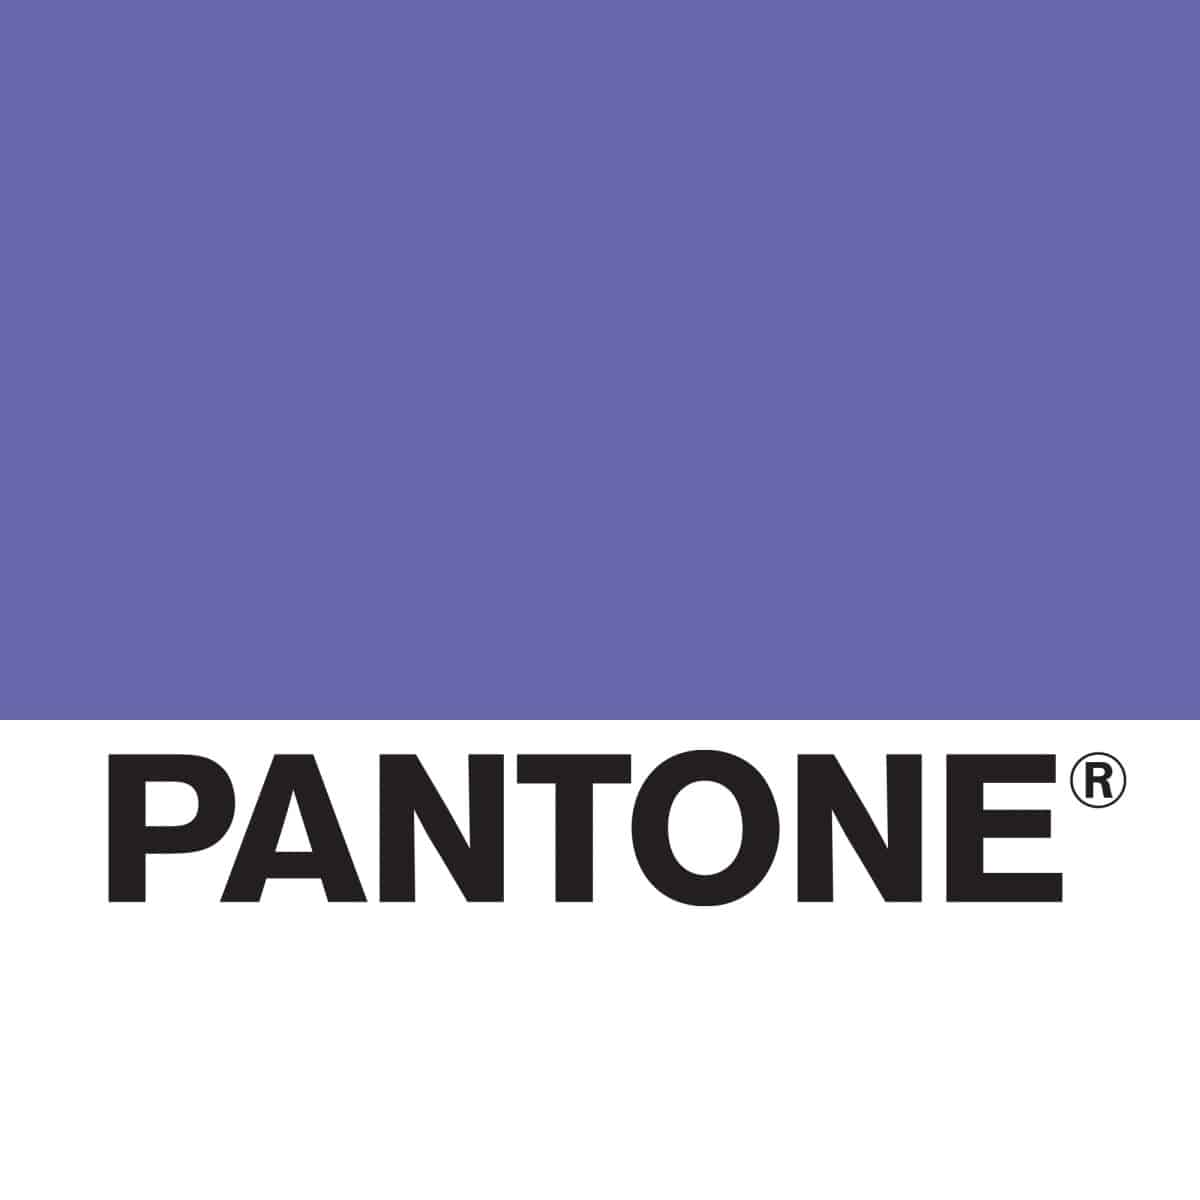 Pantone Colour of the Year 2022 – Very Peri